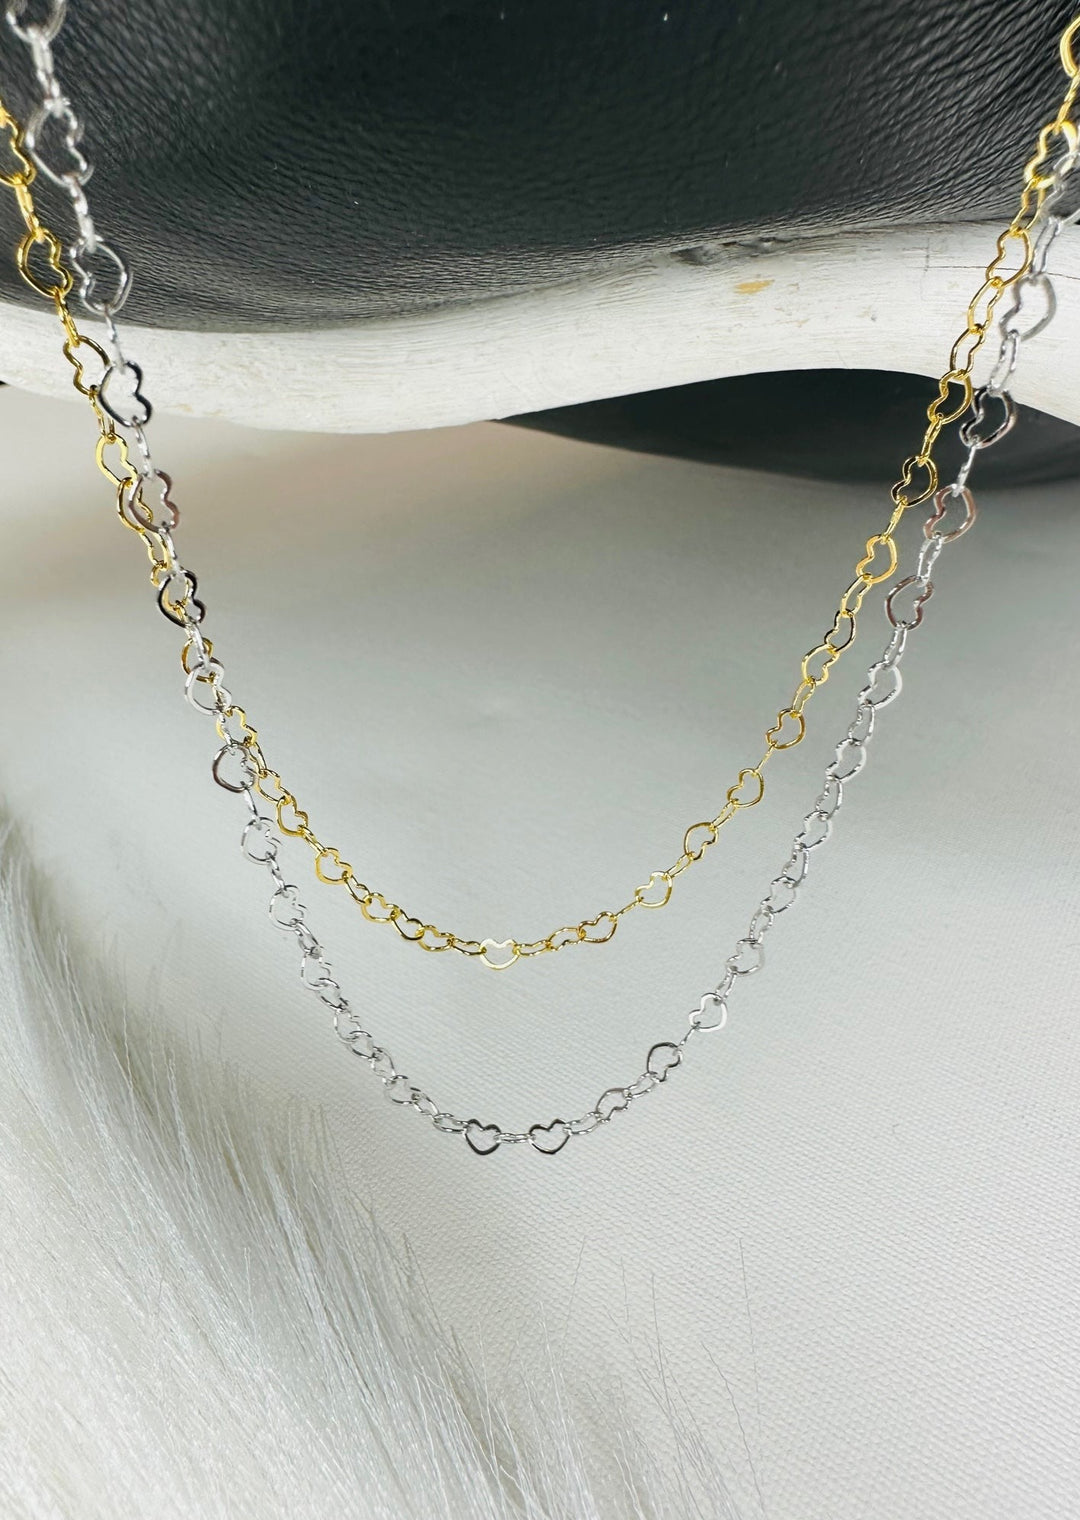 "LOVE BITES" LINKED HEARTS CHAIN NECKLACE